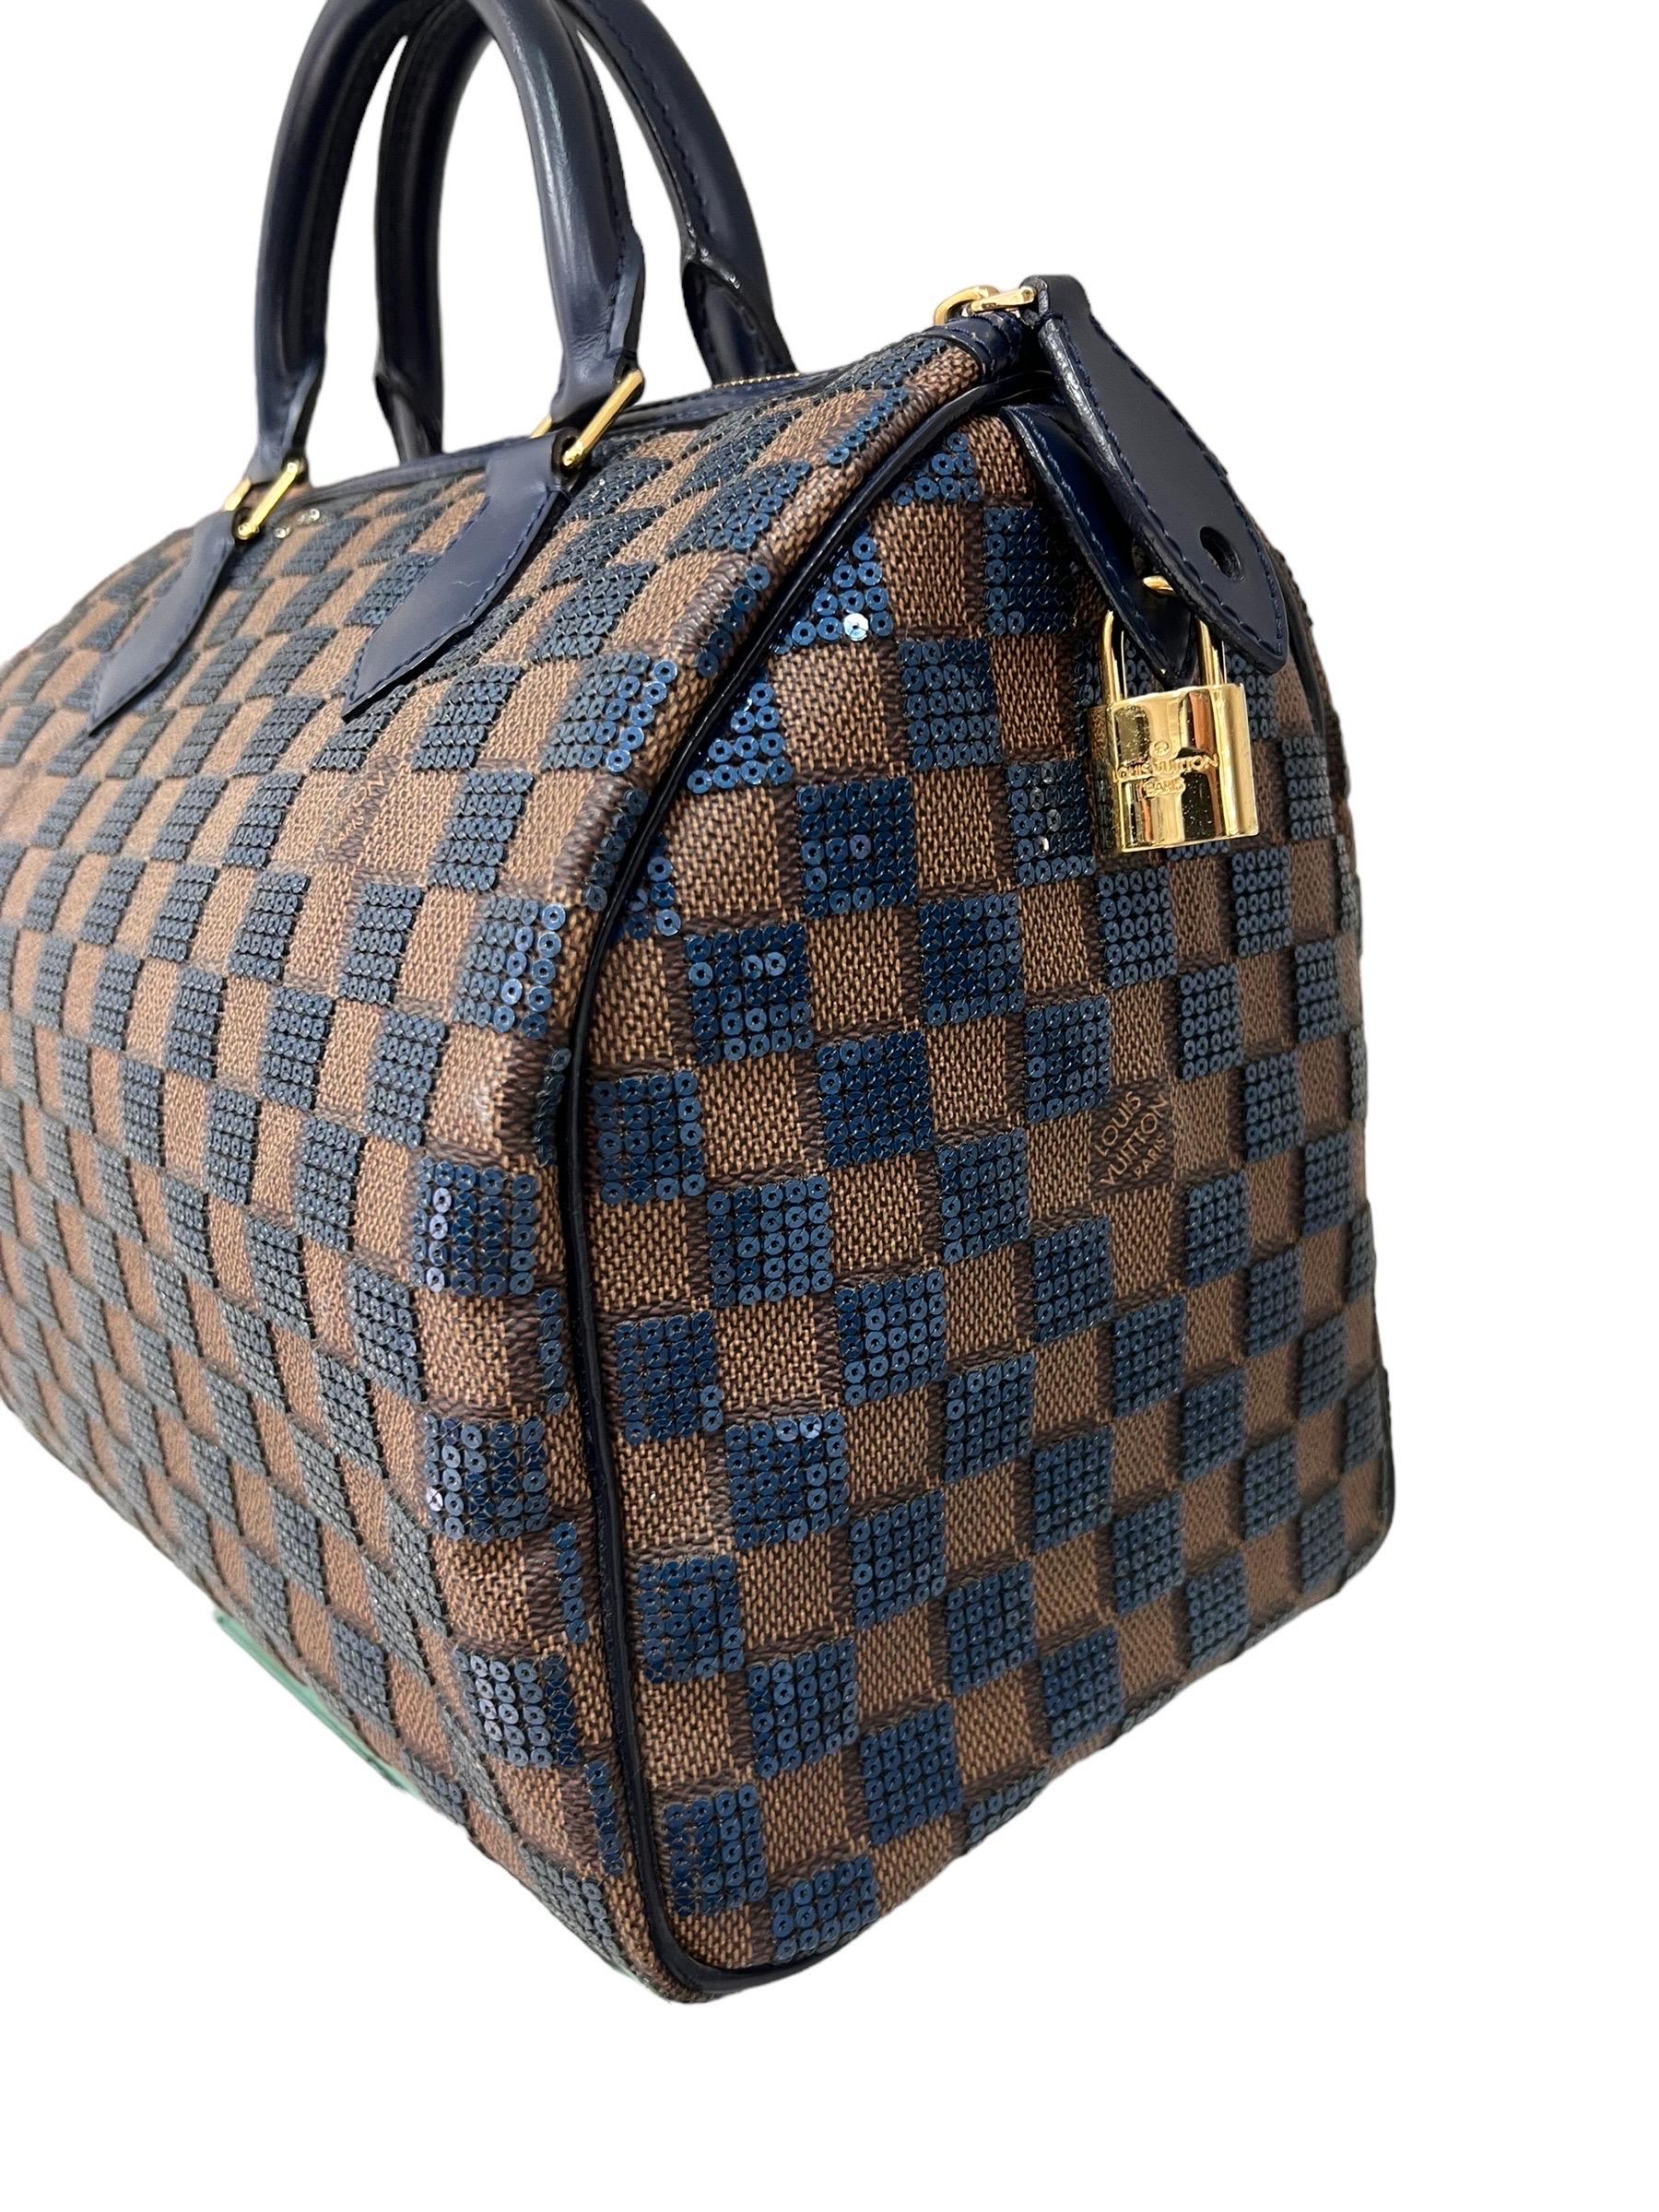 Louis Vuitton Speedy 30 Damier Paillettes Navy In Excellent Condition For Sale In Torre Del Greco, IT